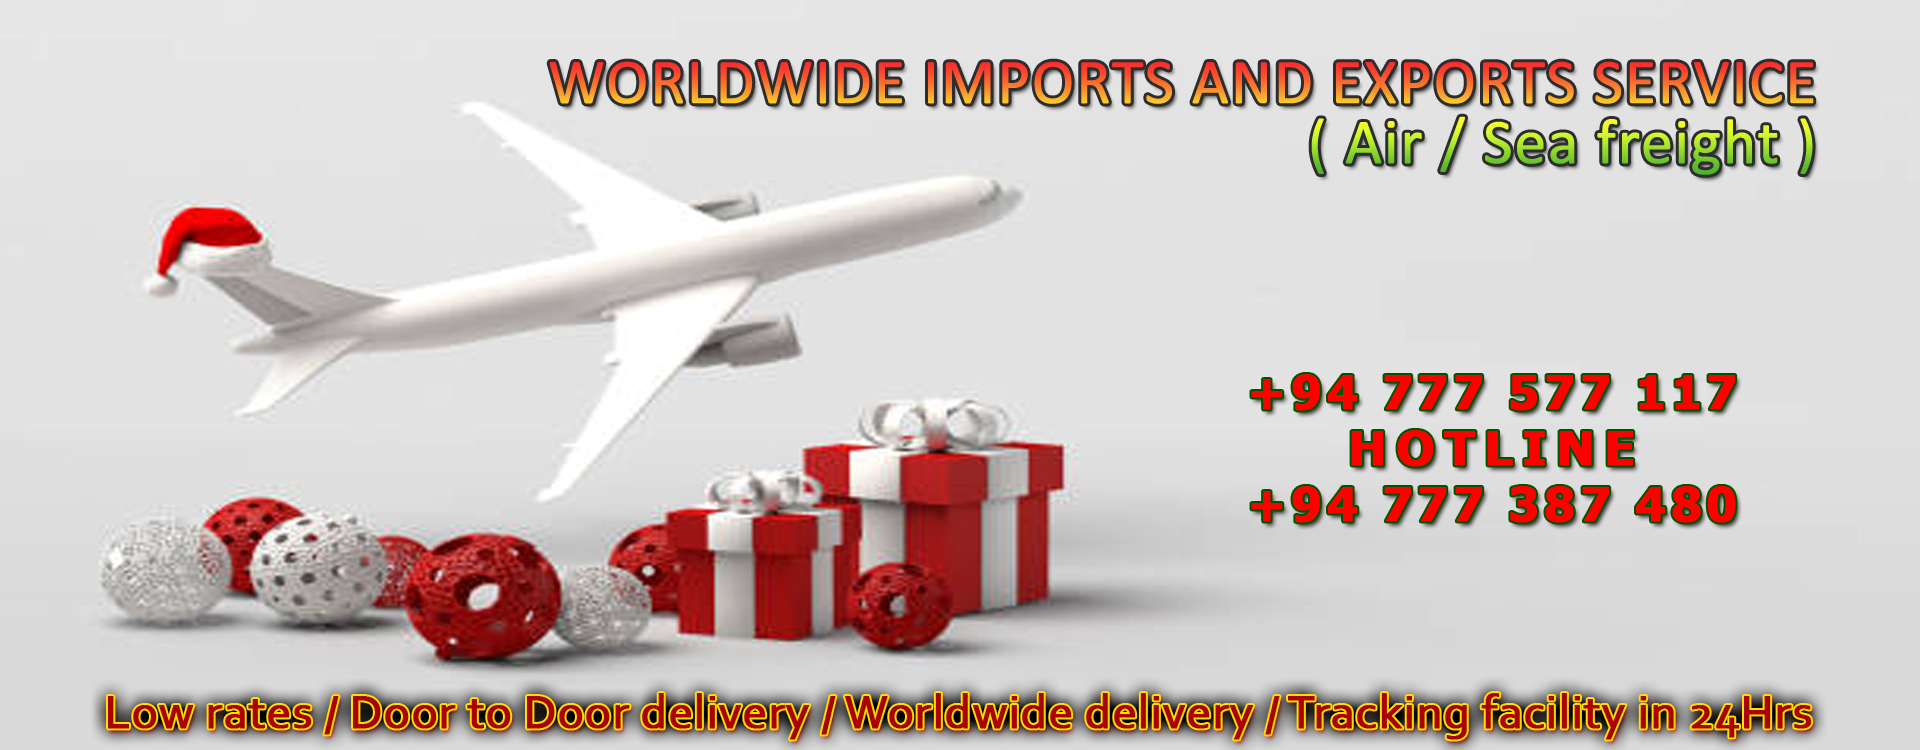 WORLDWIDE IMPORTS AND EXPORTS SERVICE